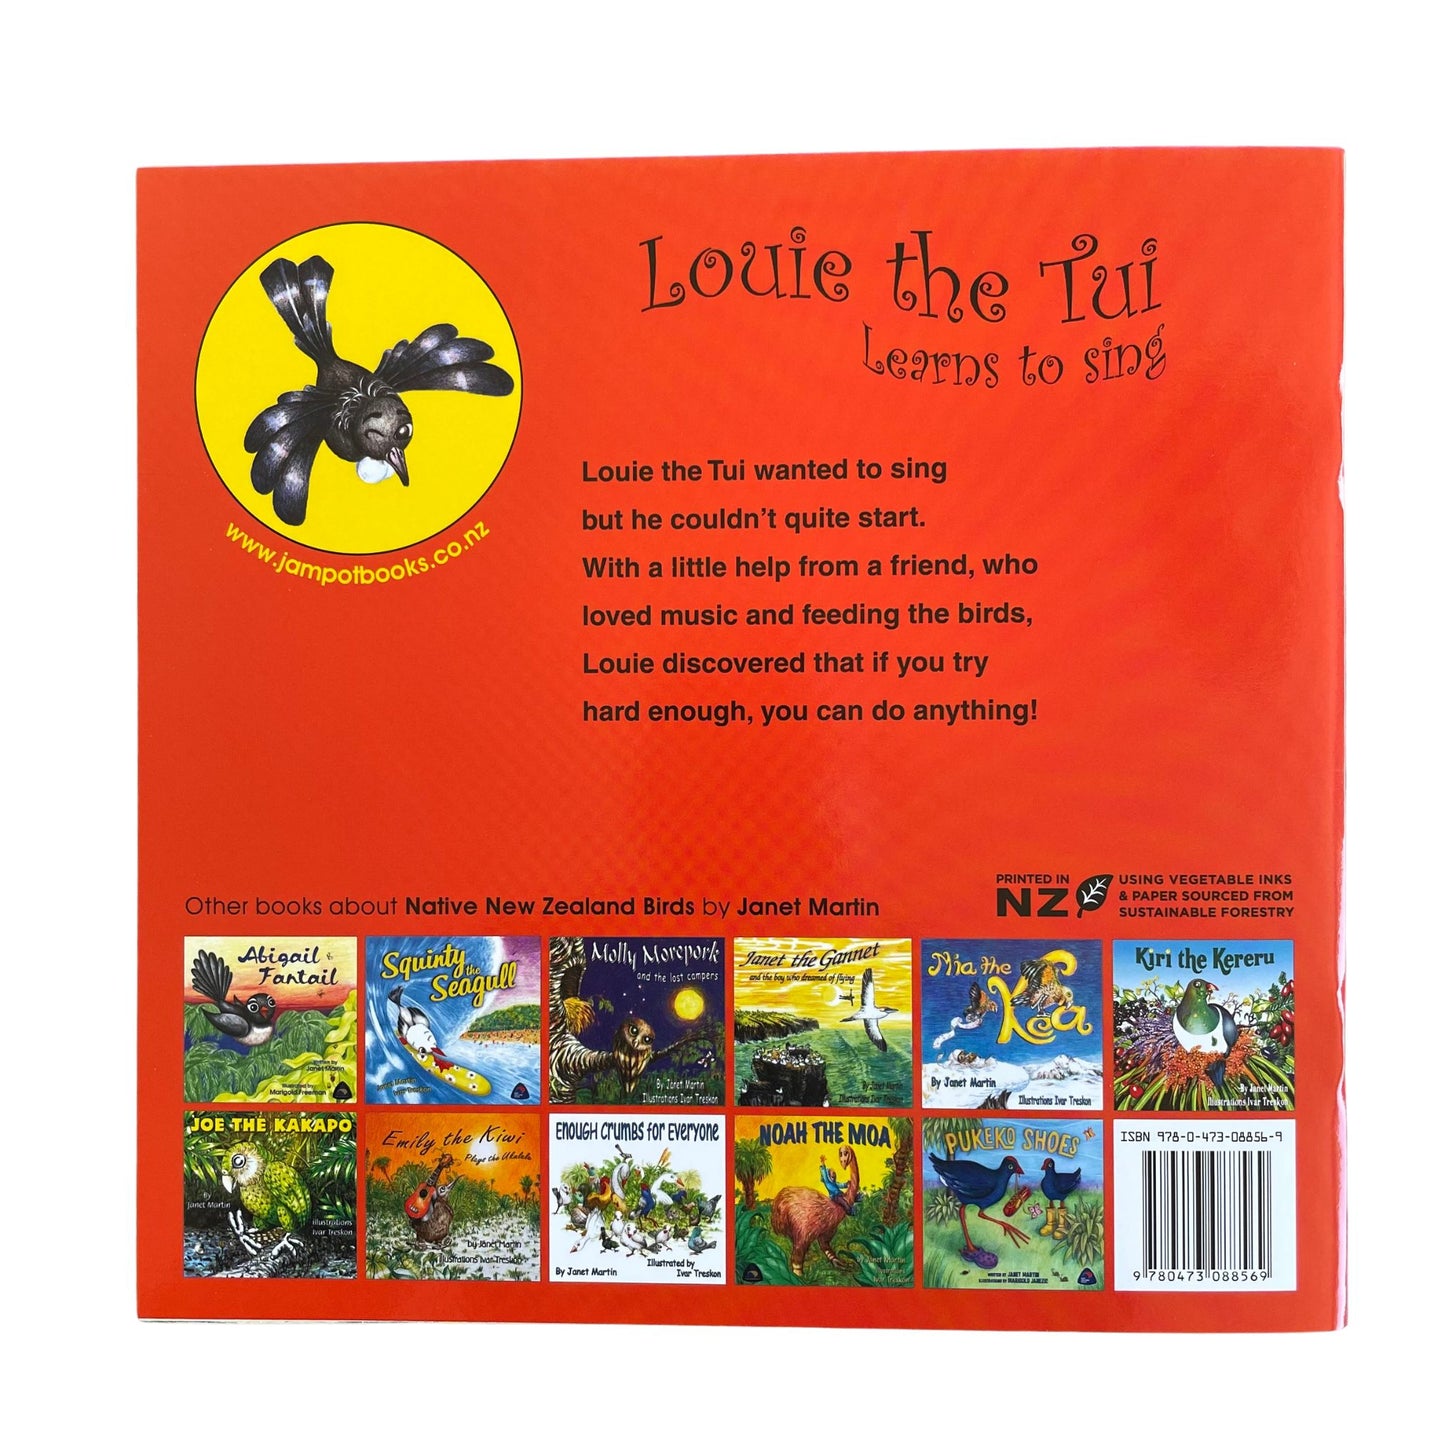 Louie the Tui Learns to Sing - Soft Cover Children's reading book. Back cover of the book.